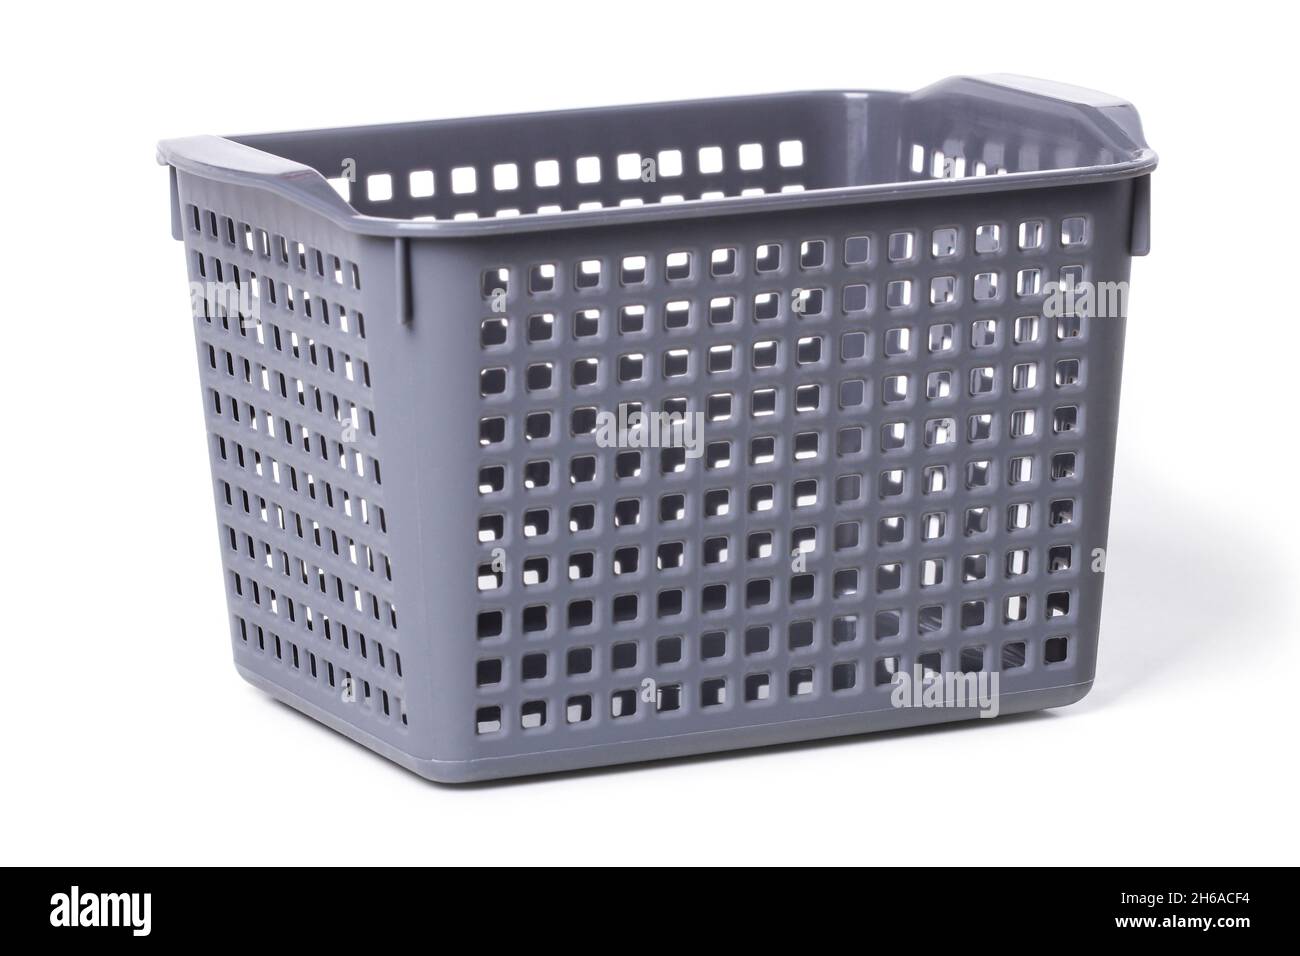 https://c8.alamy.com/comp/2H6ACF4/gray-plastic-basket-for-household-items-isolated-on-white-2H6ACF4.jpg